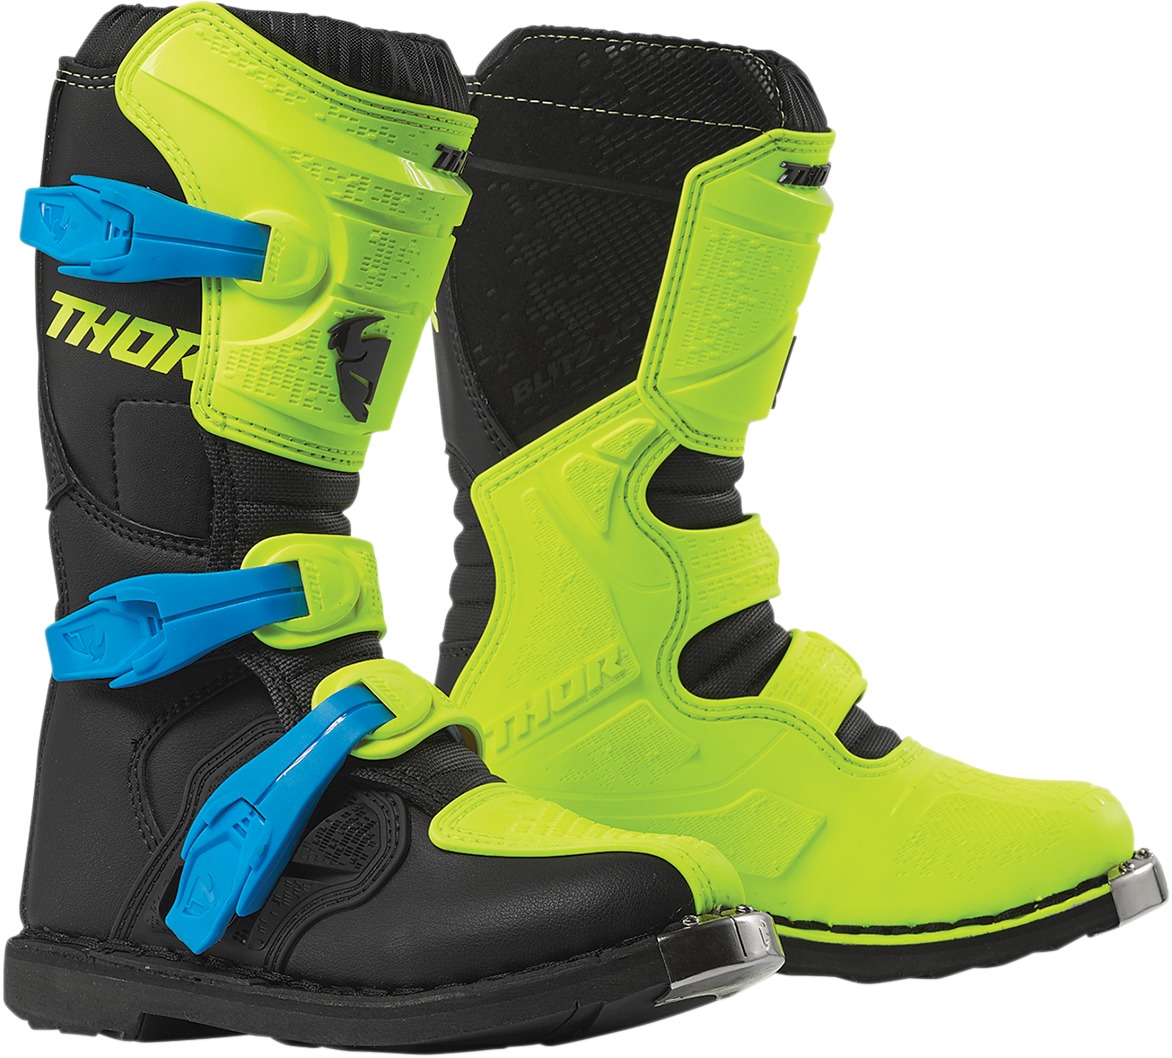 Blitz XP Dirt Bike Boots - Black & Flo Green MX Sole US Size Youth 02 - Click Image to Close